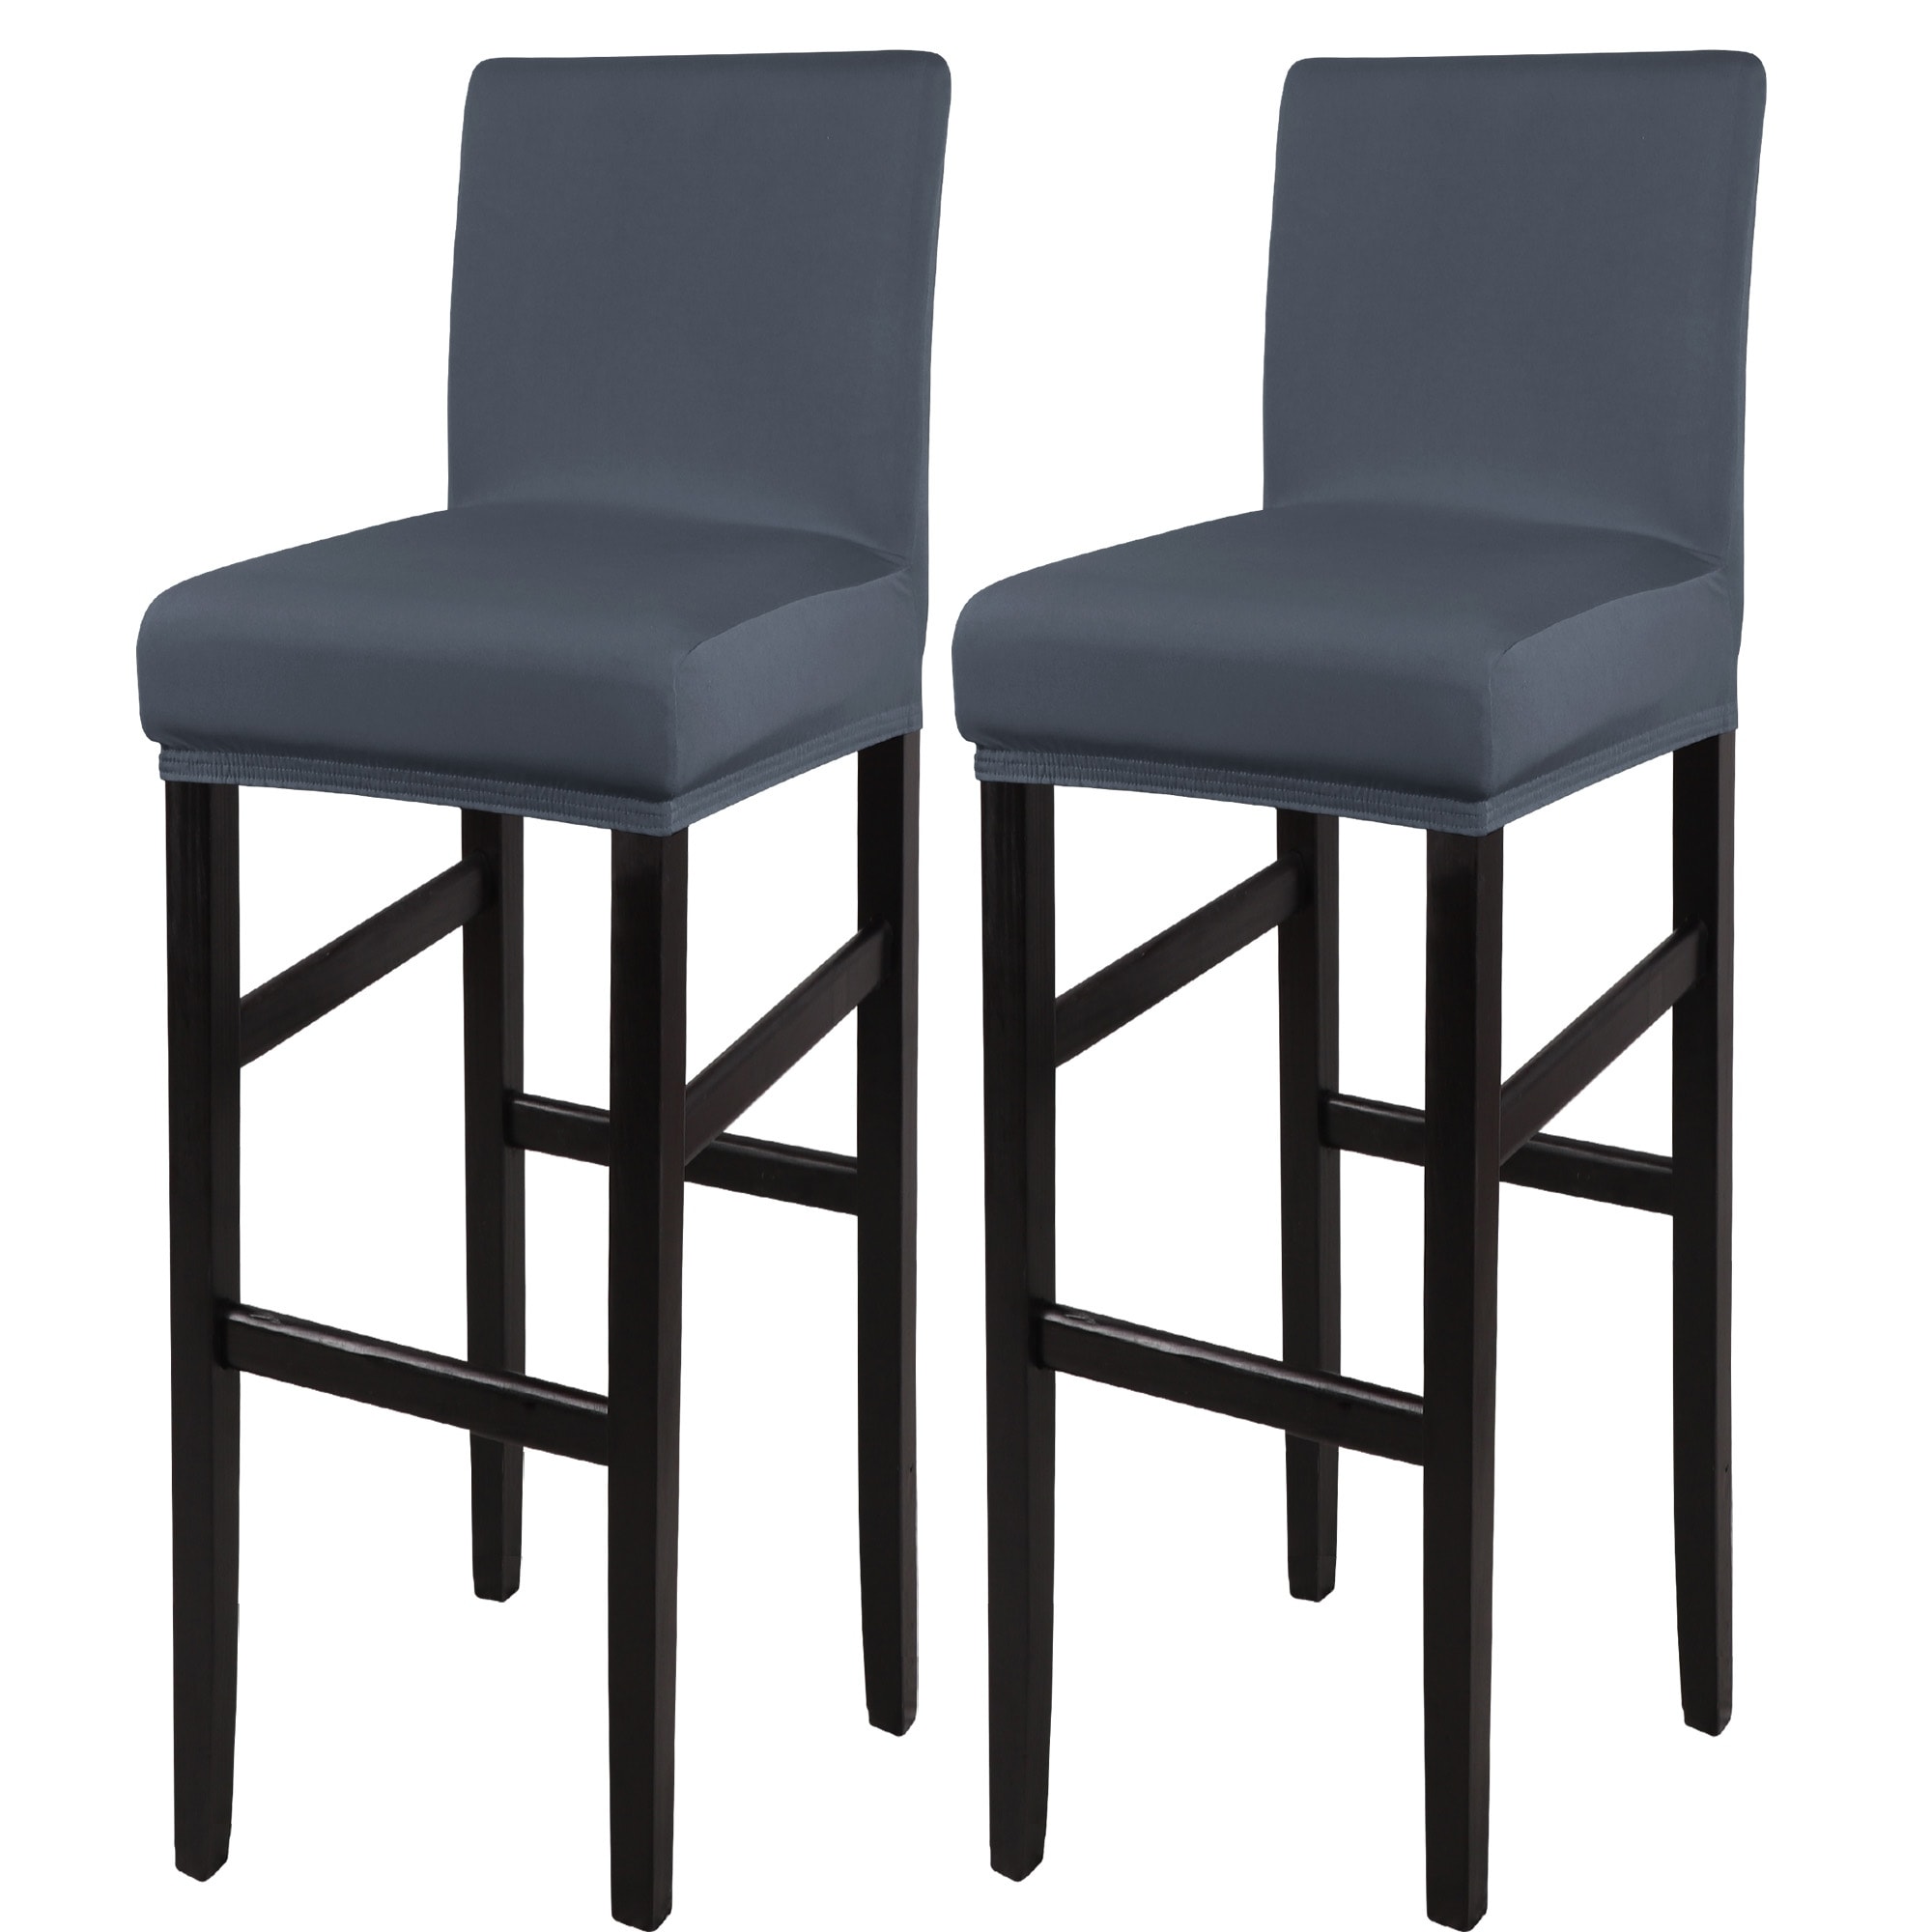 https://ak1.ostkcdn.com/images/products/is/images/direct/1949c2bb7ac6889823ec0680eaa52700209cebe0/Stretch-Bar-Stool-Cover-for-Bar-Height-Side-Chair-Slipcovers.jpg